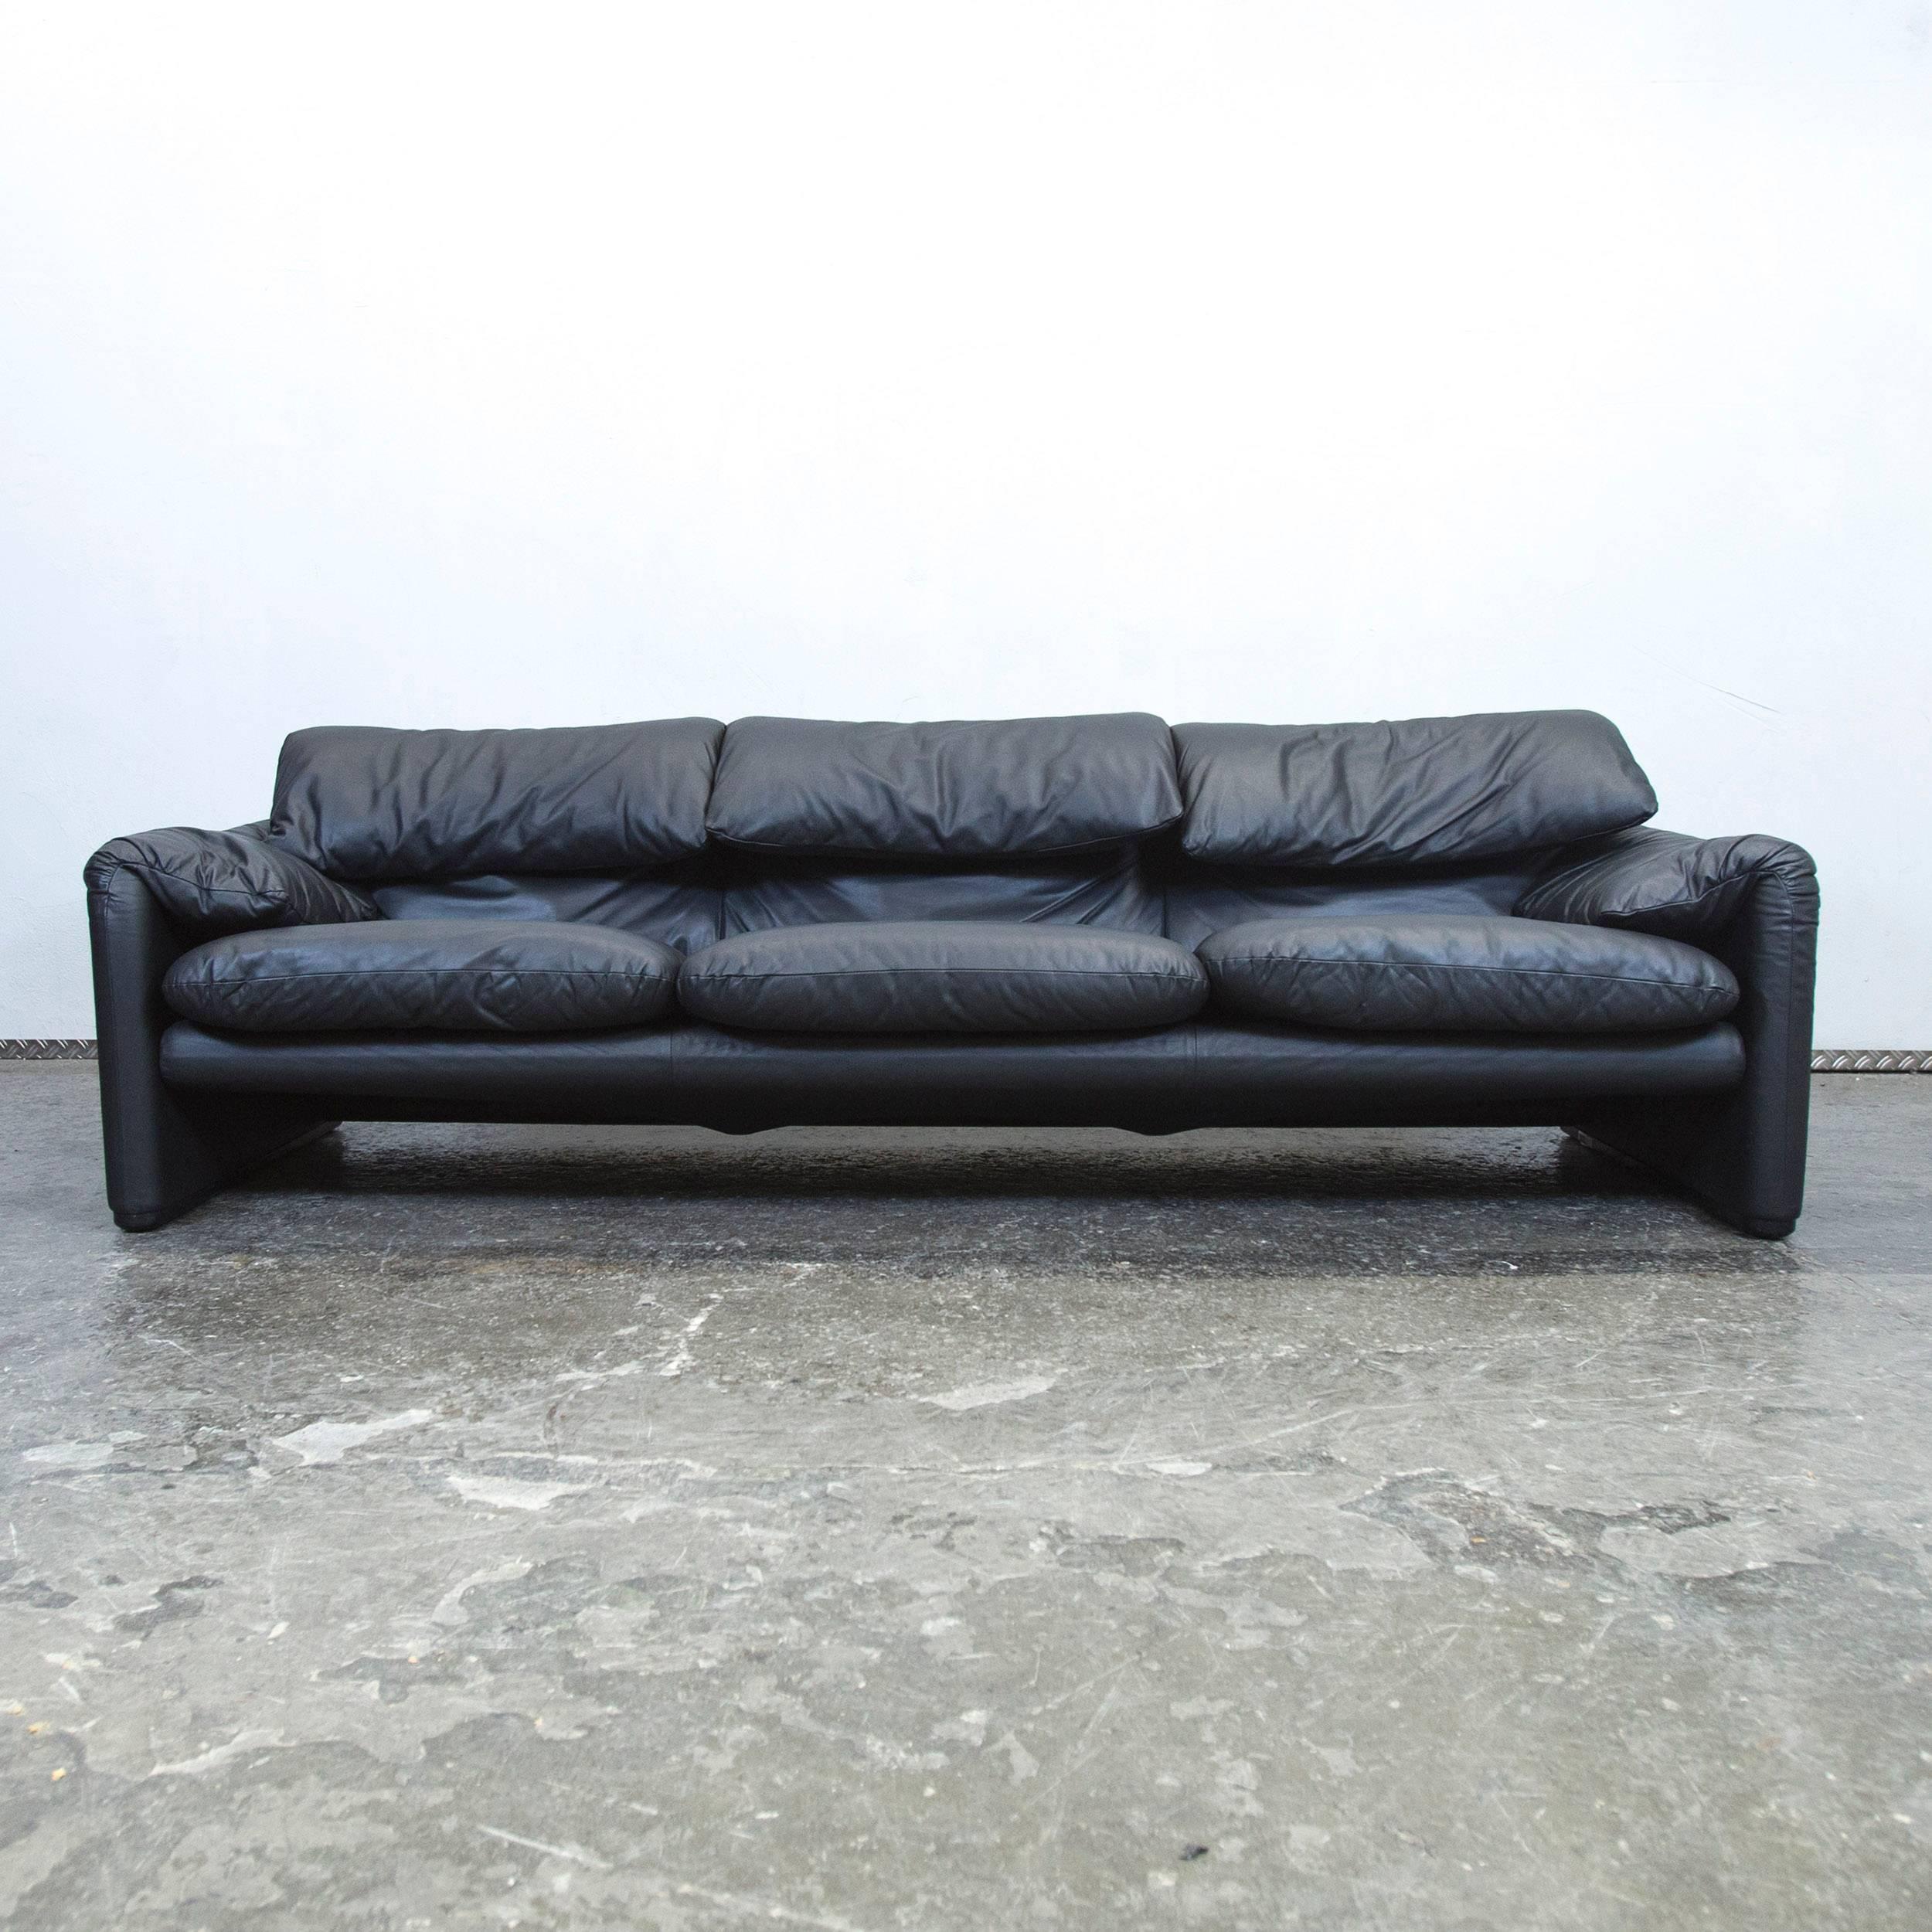 Black colored original Cassina Maralunga designer leather sofa, in a minimalistic and modern design, with convenient functions, made for pure comfort and style.